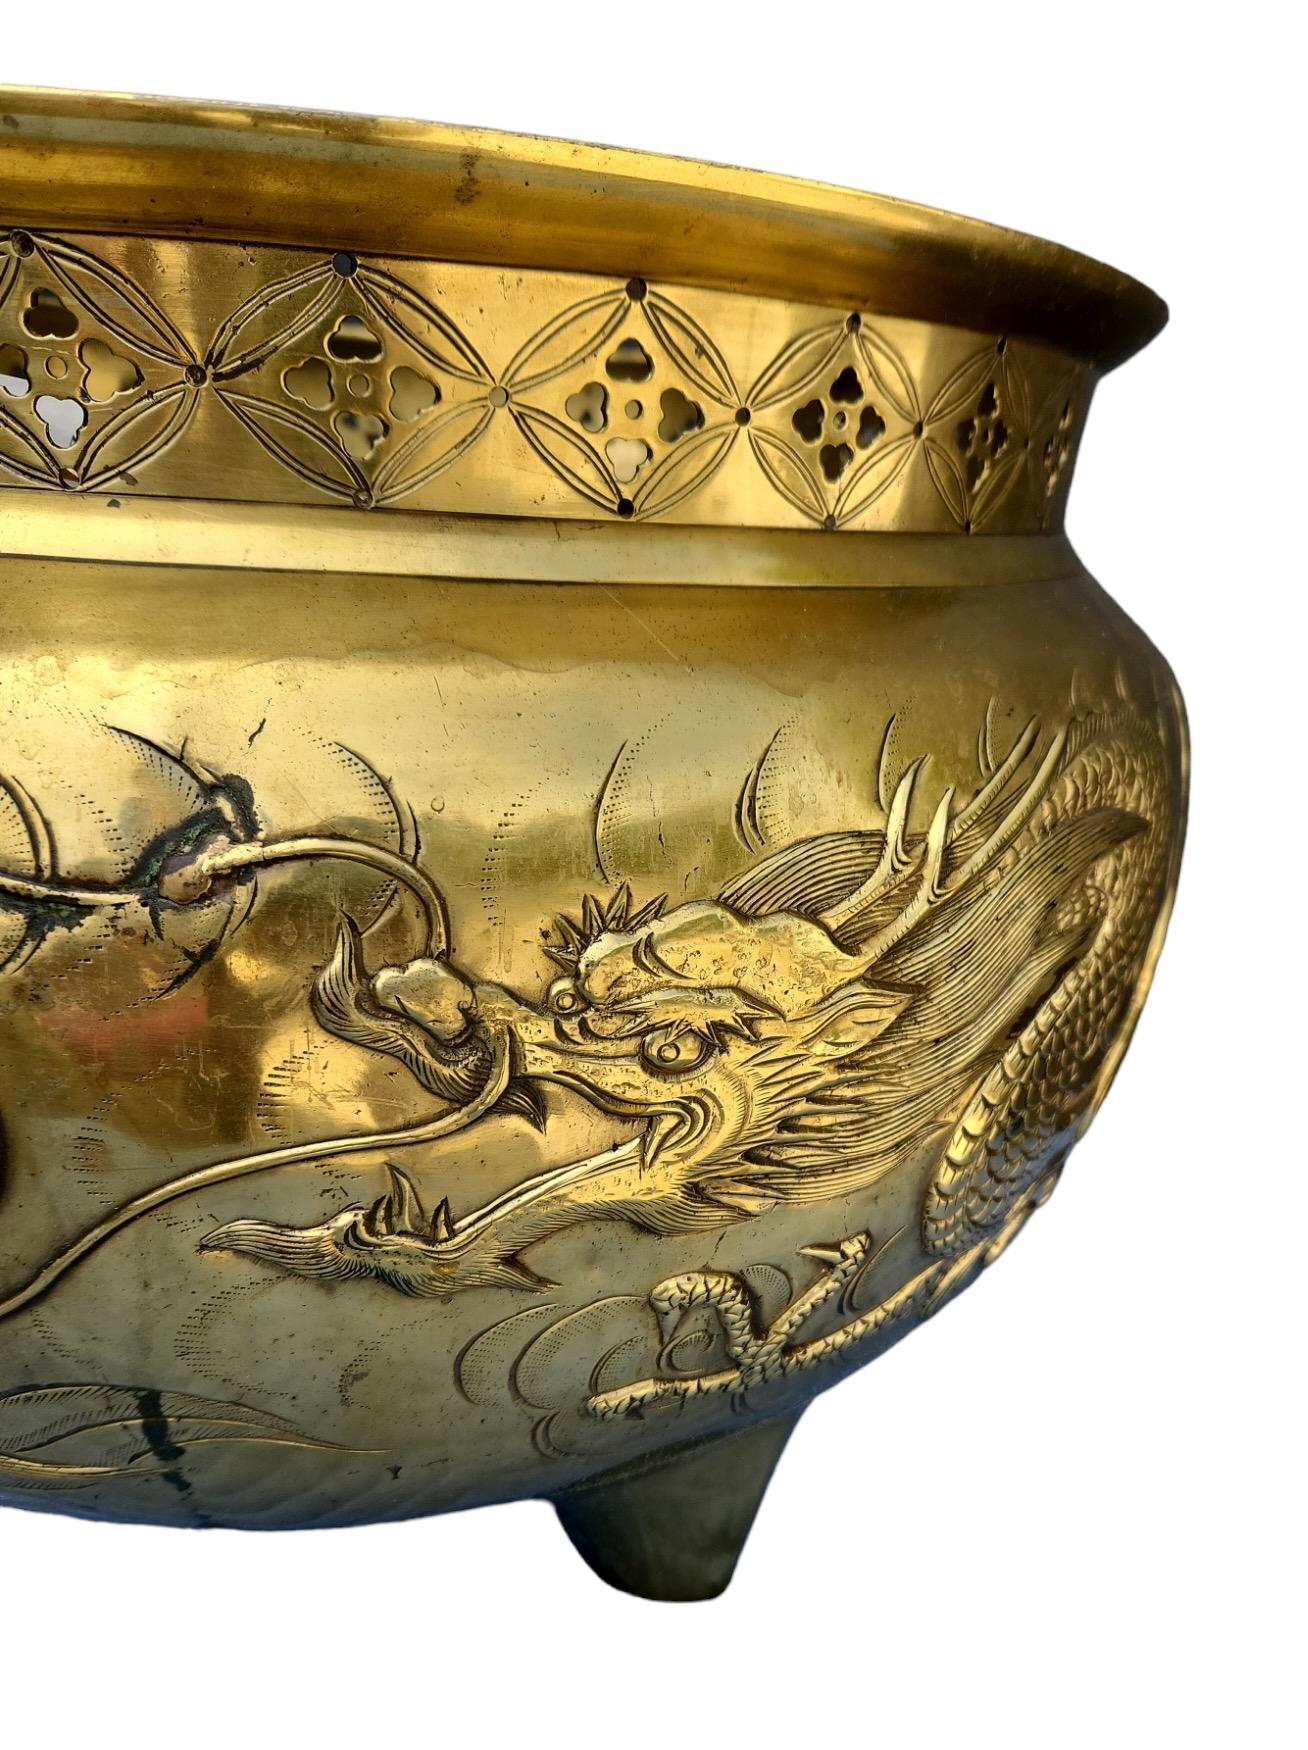 1900s brass (possibly bronze) jardineres with finely detailed dragon motif and pierced rim detail.